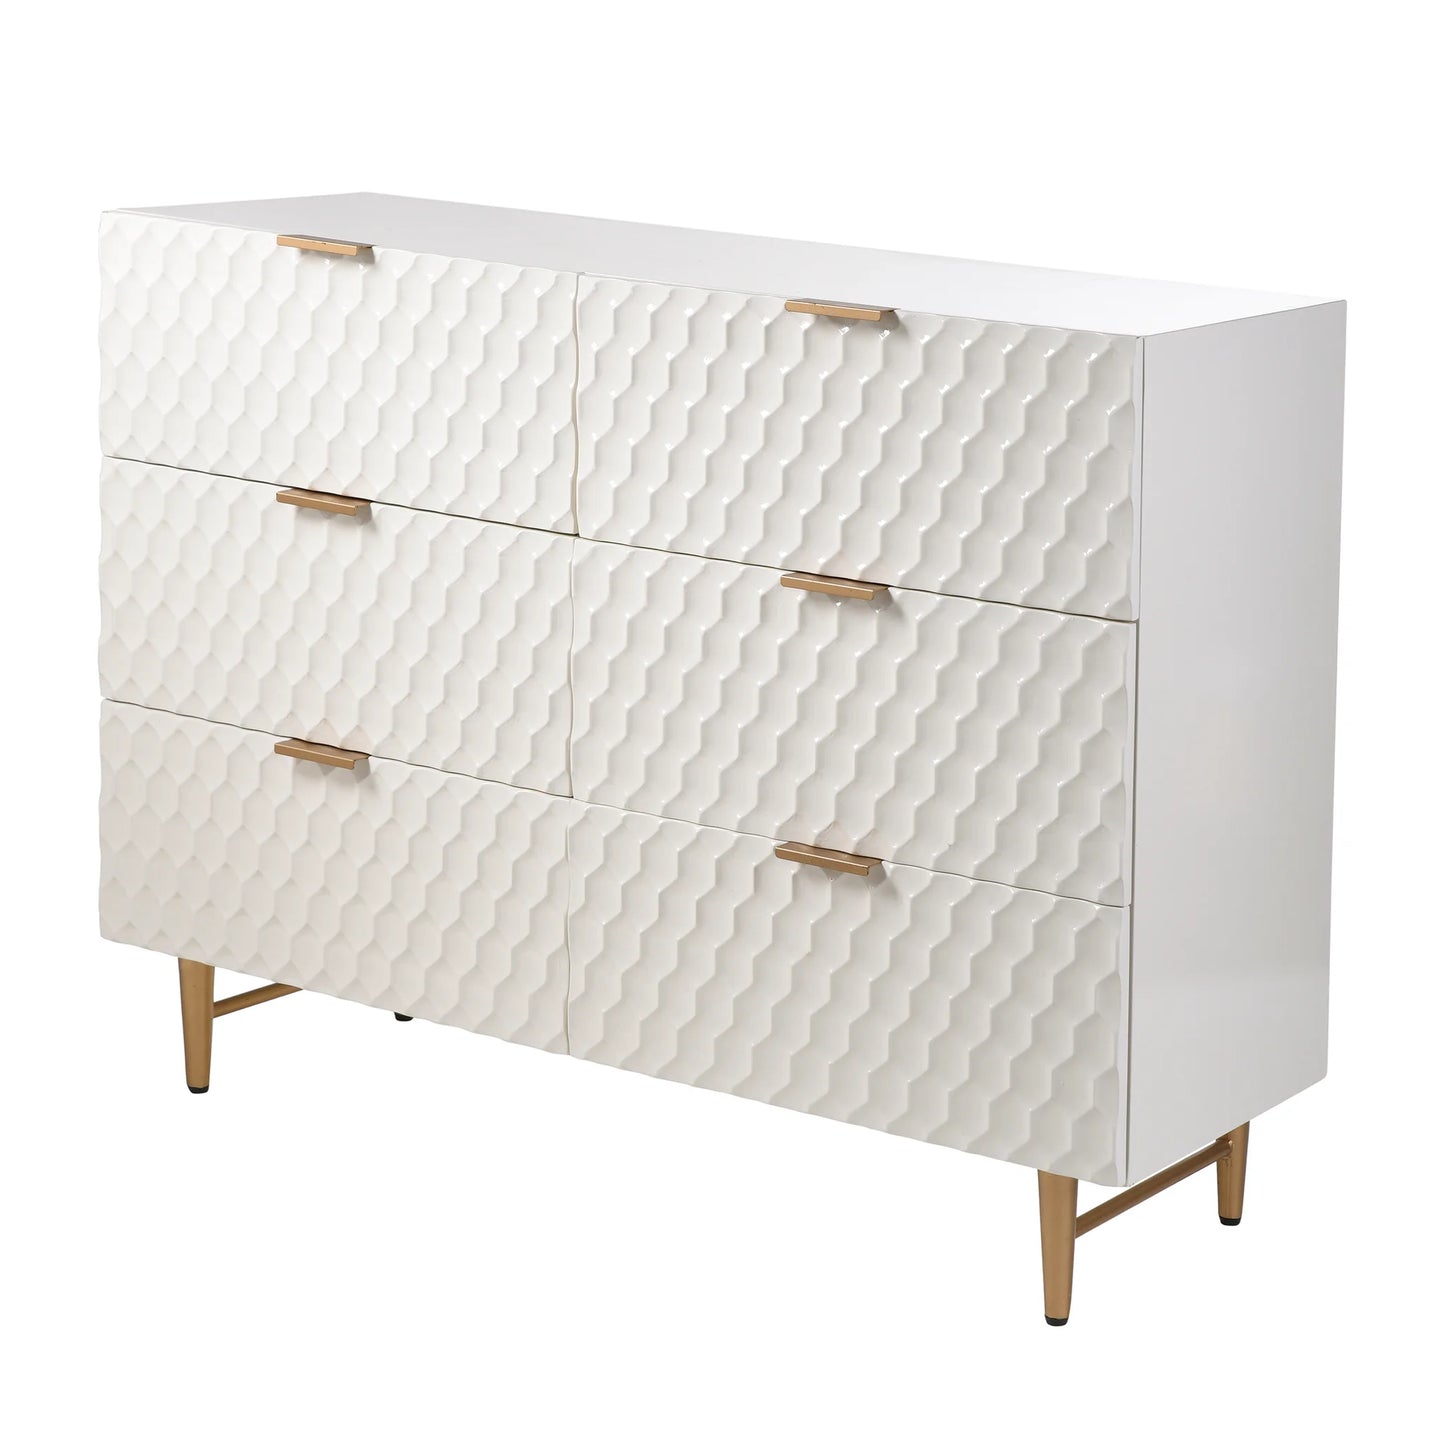 Cream Textured Contemporary Cabinet With Gold Hardware